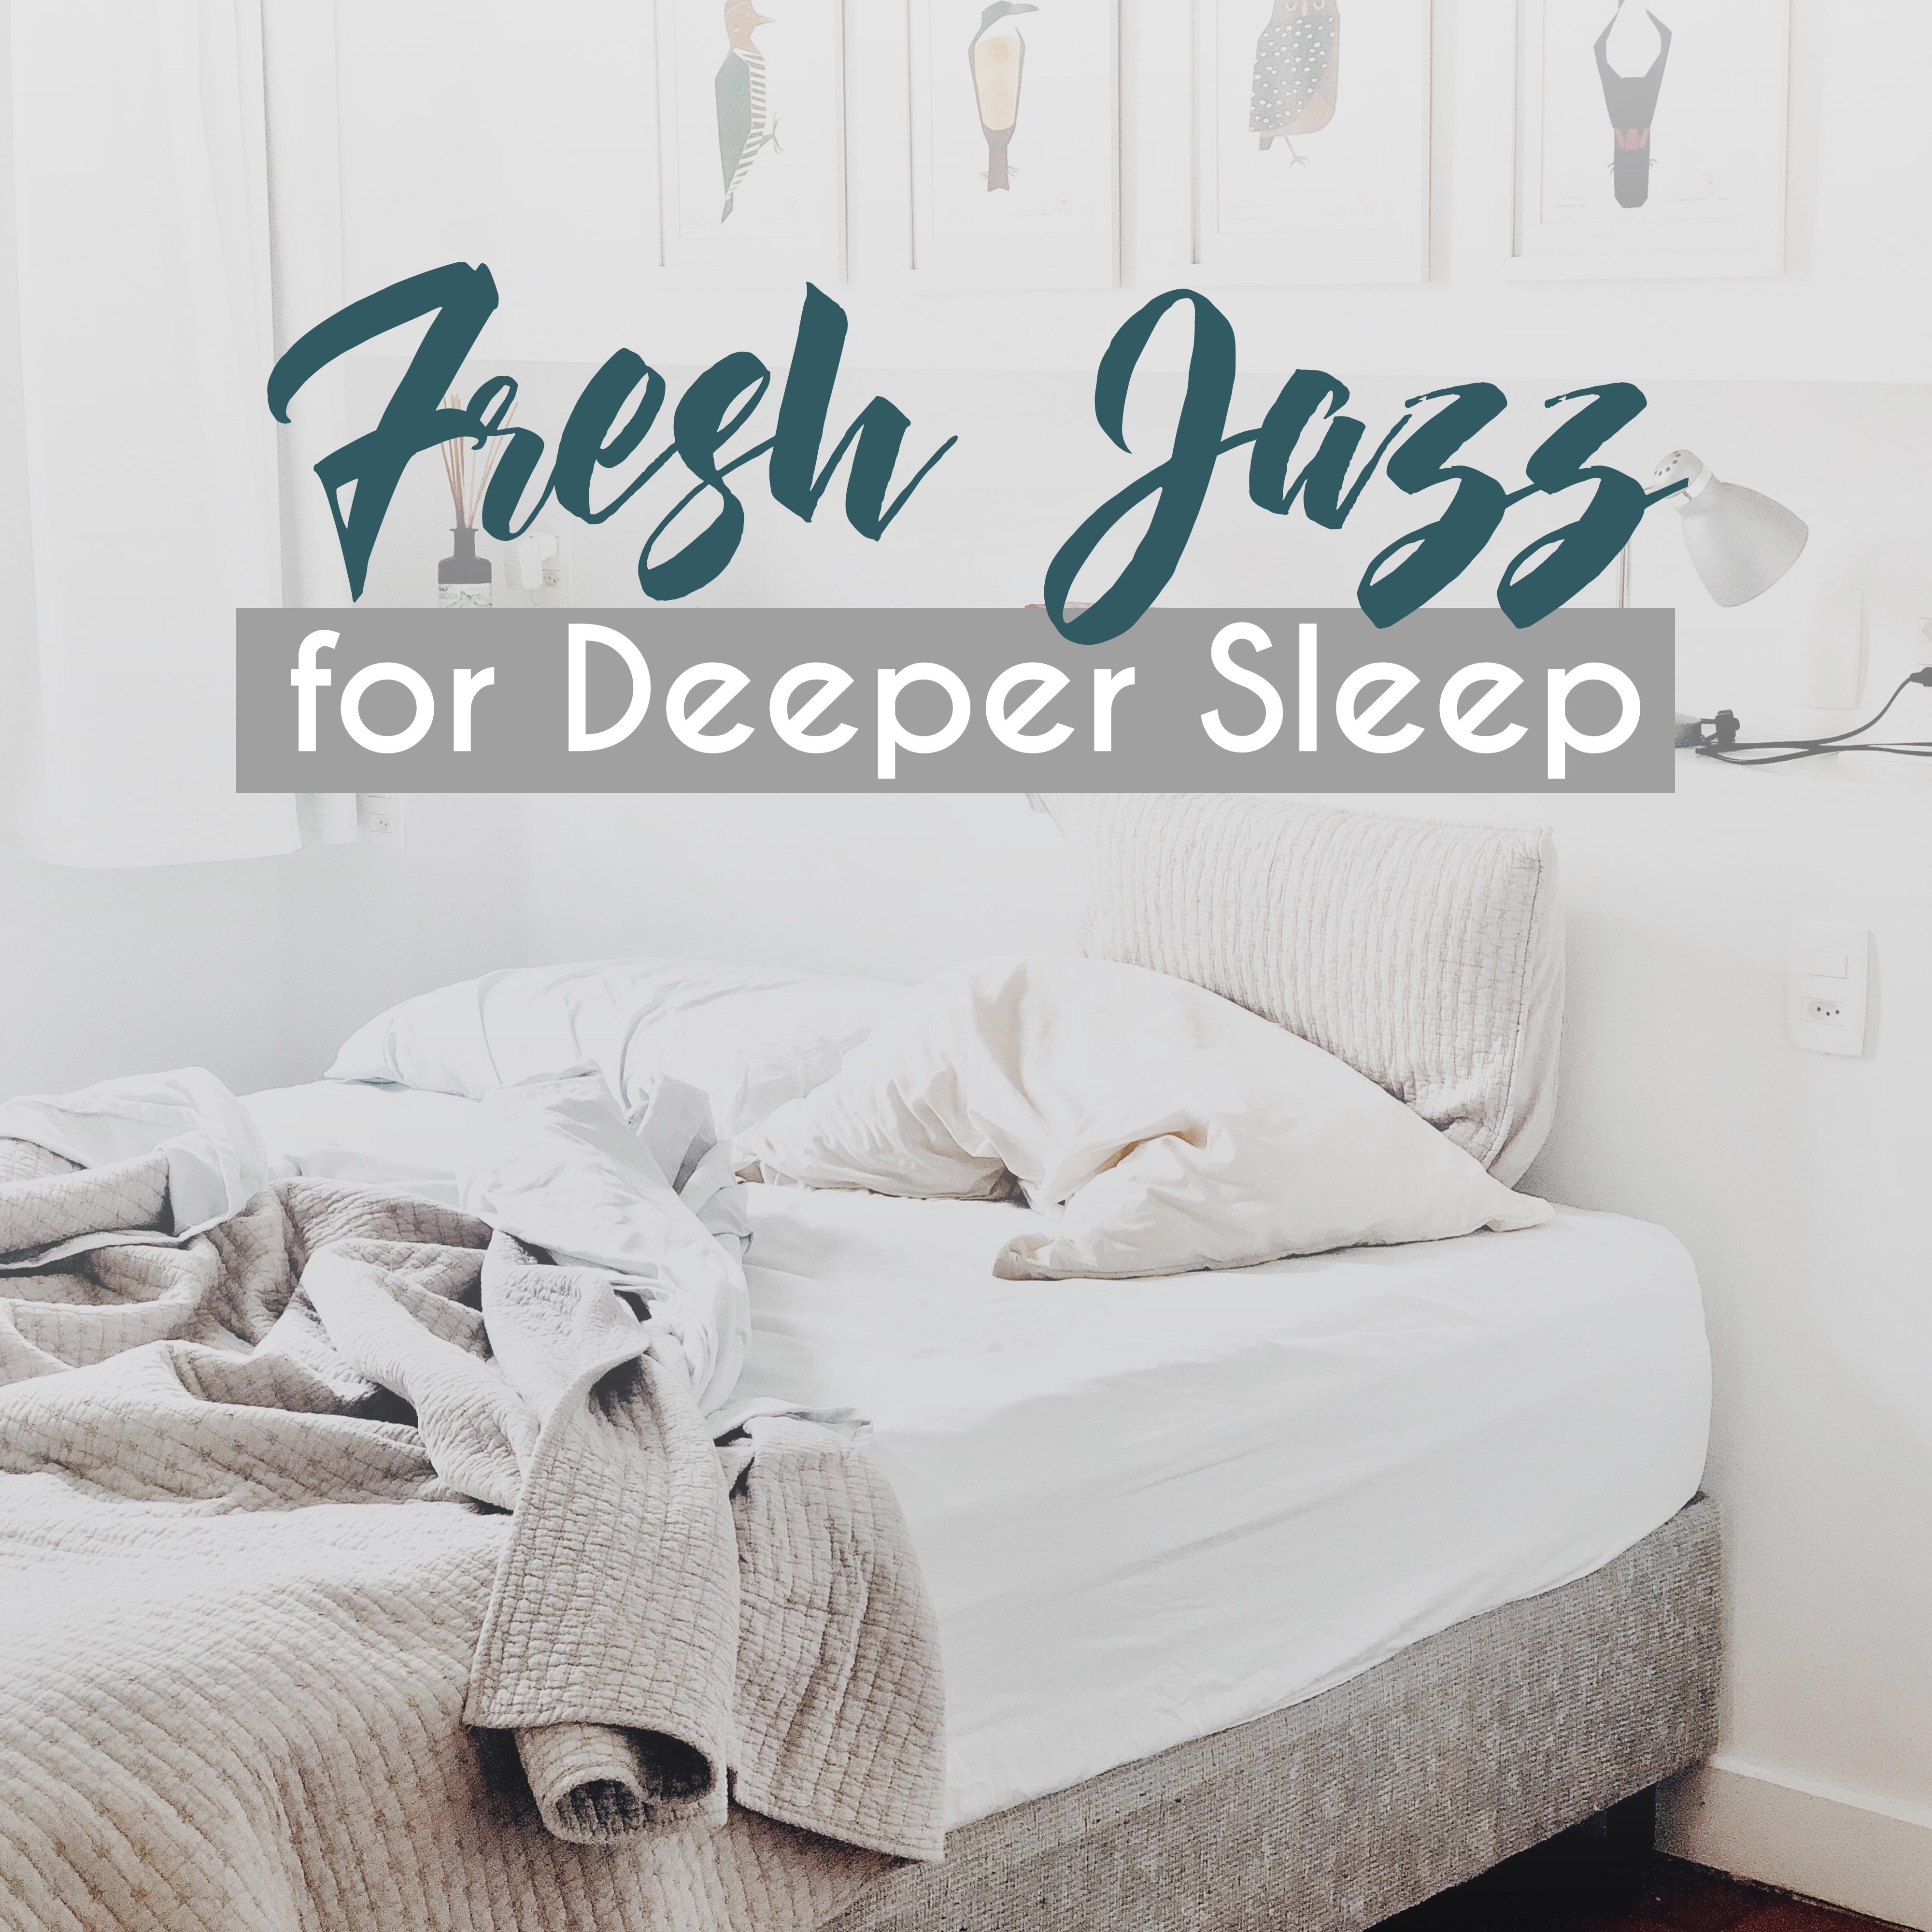 Fresh Jazz for Deeper Sleep – Ambient Music for Relaxation, Rest, Sleep, Jazz Vibrations to Calm Down, Instrumental Jazz Music Ambient